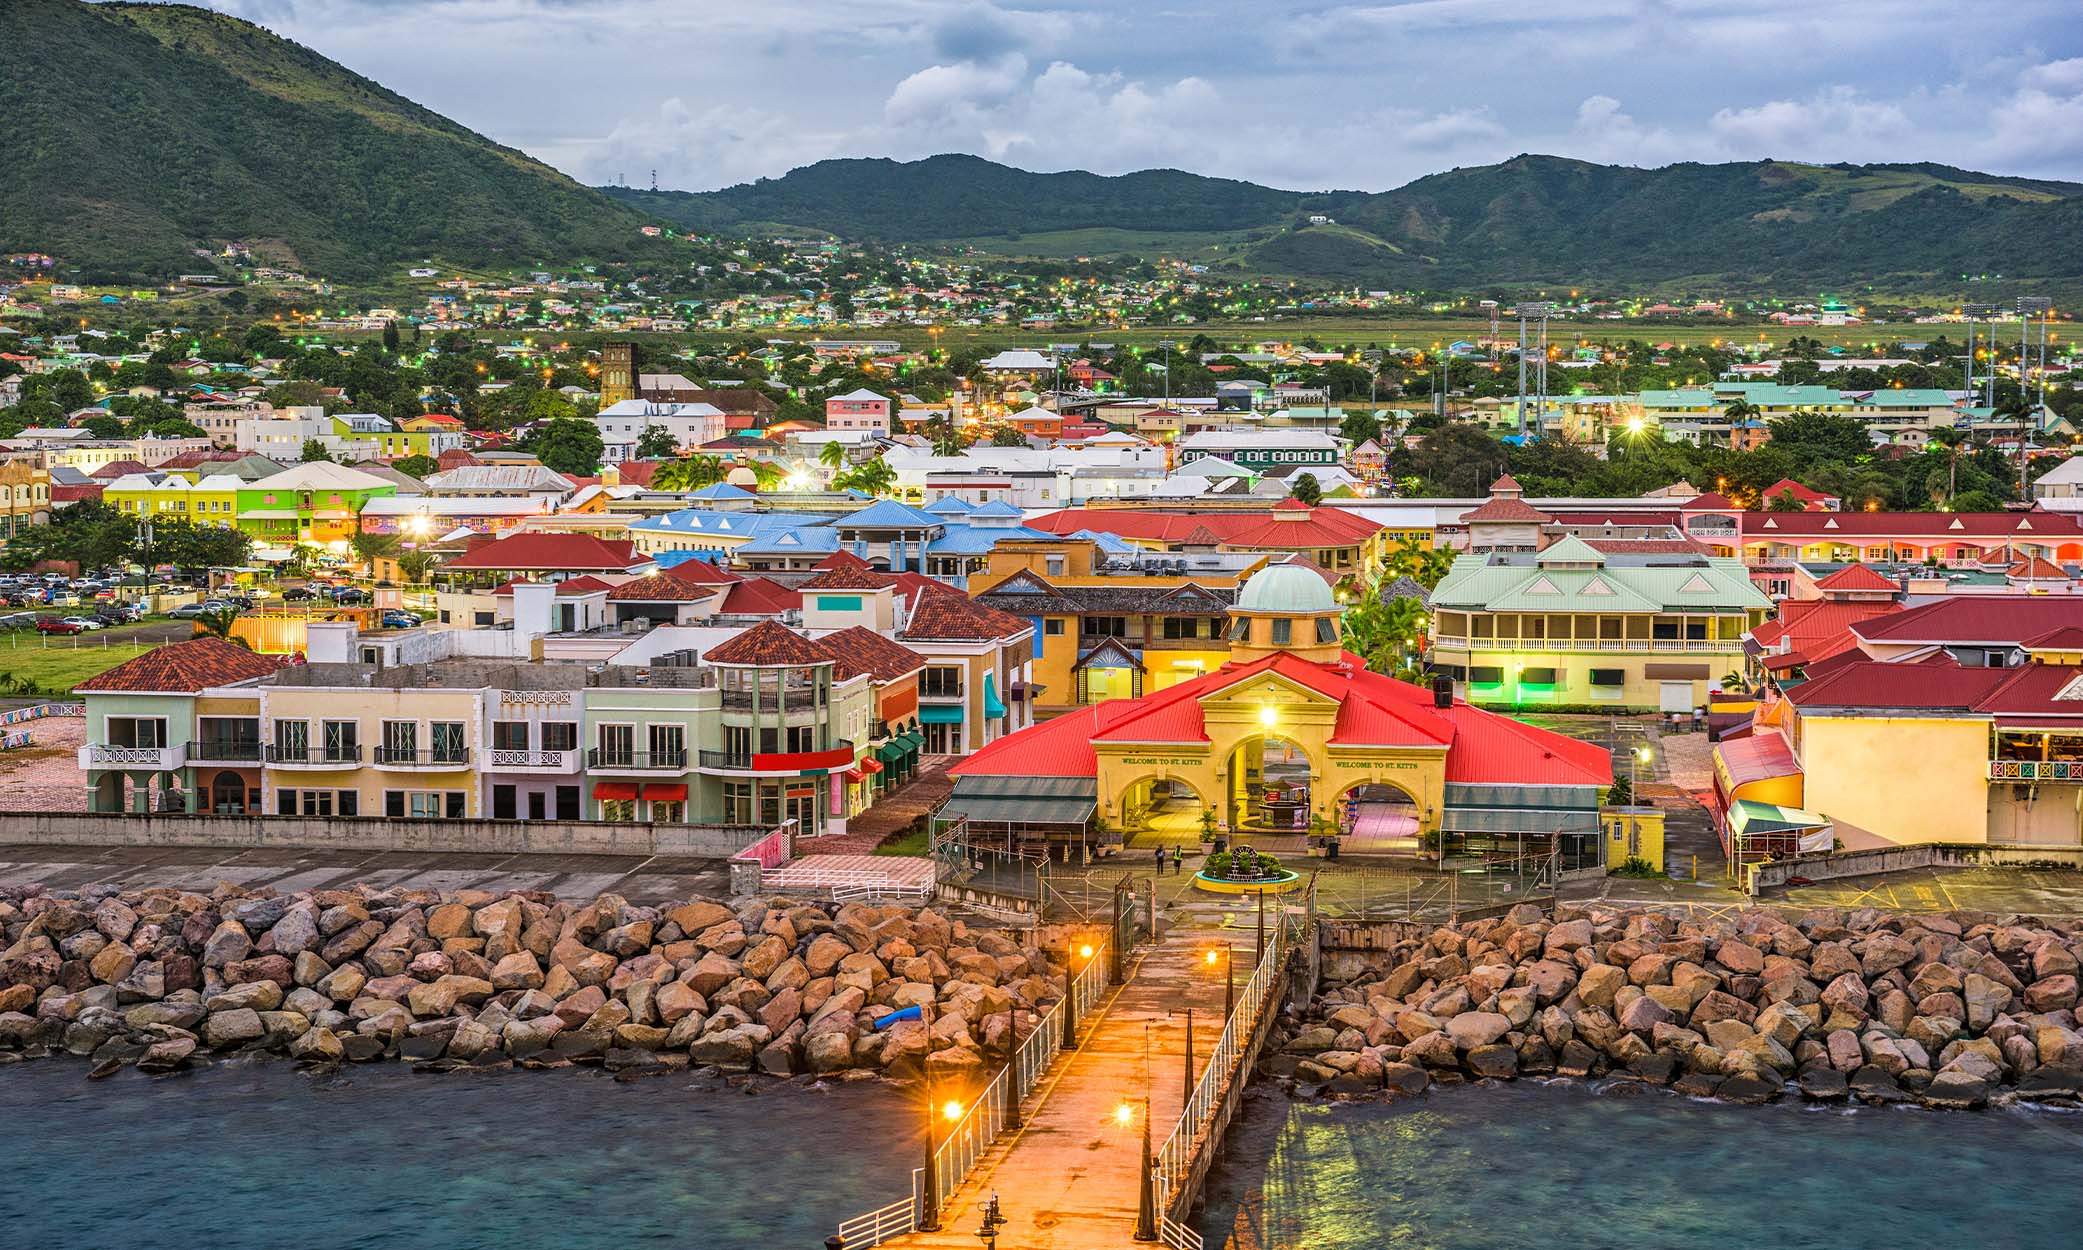 St Kitts and Nevis is in the Eastern Caribbean.